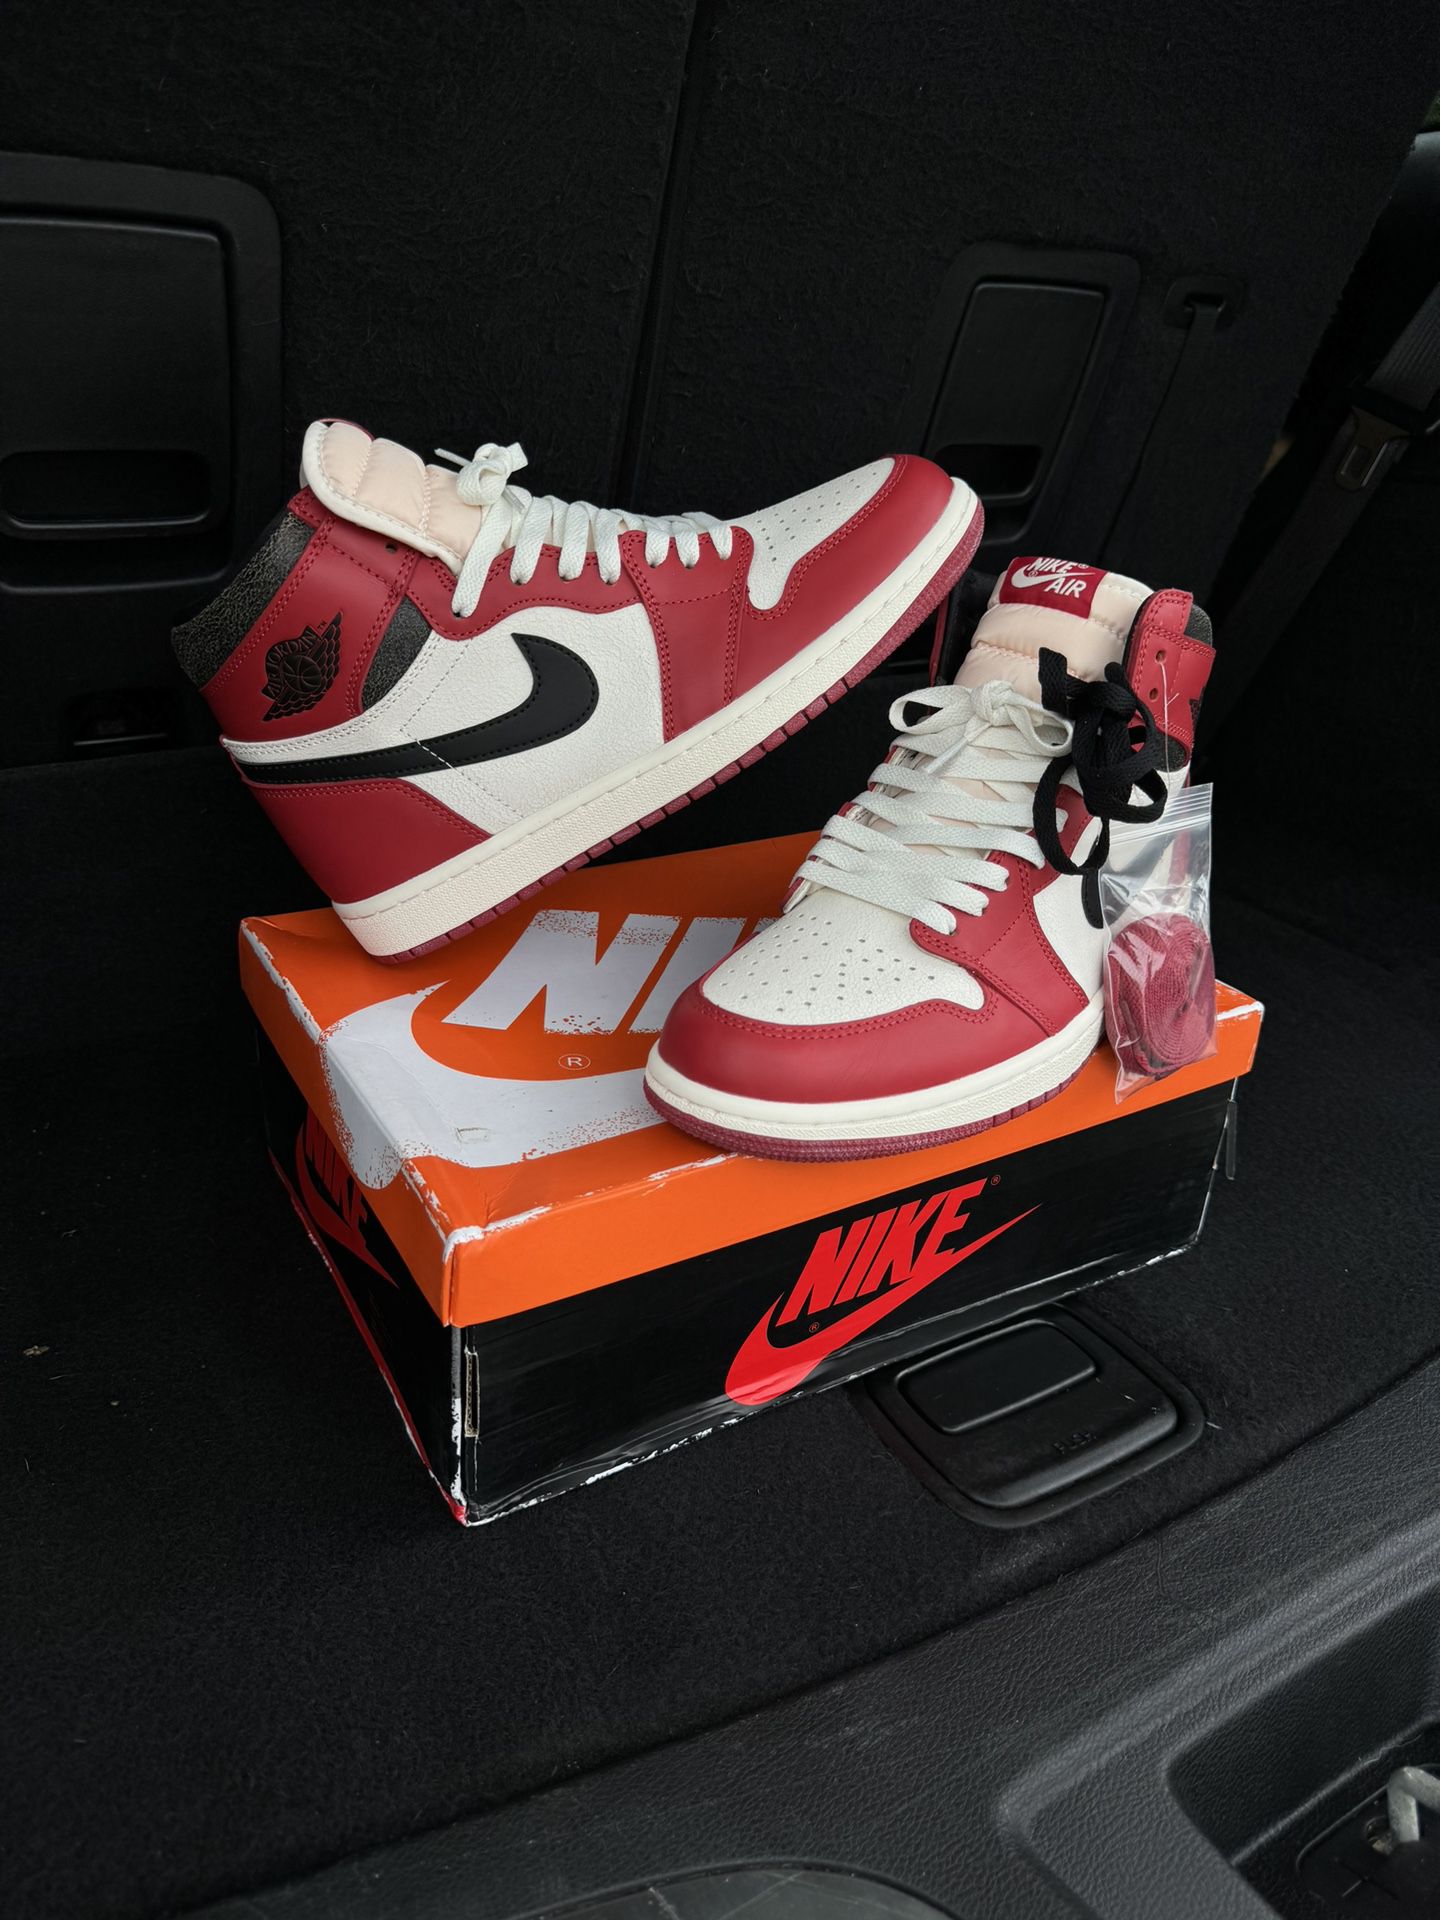 BRAND NEW JORDAN 1 “LOST AND FOUND”